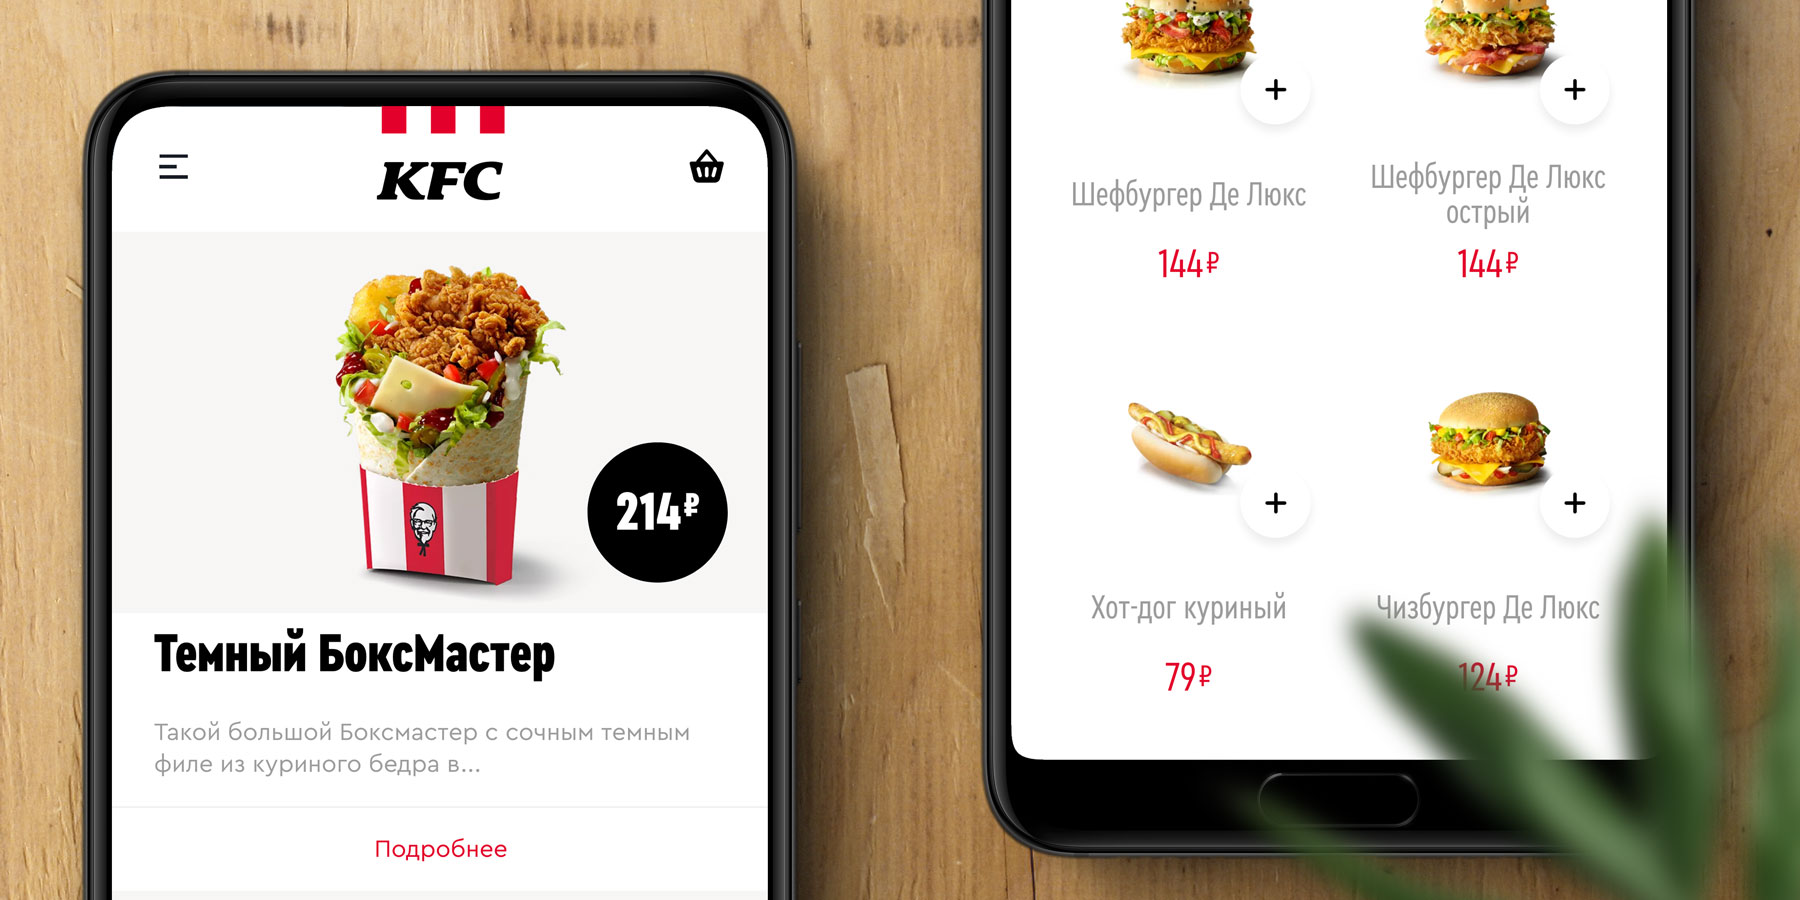 Download Kfc Russia Website 2019 Fonts In Use